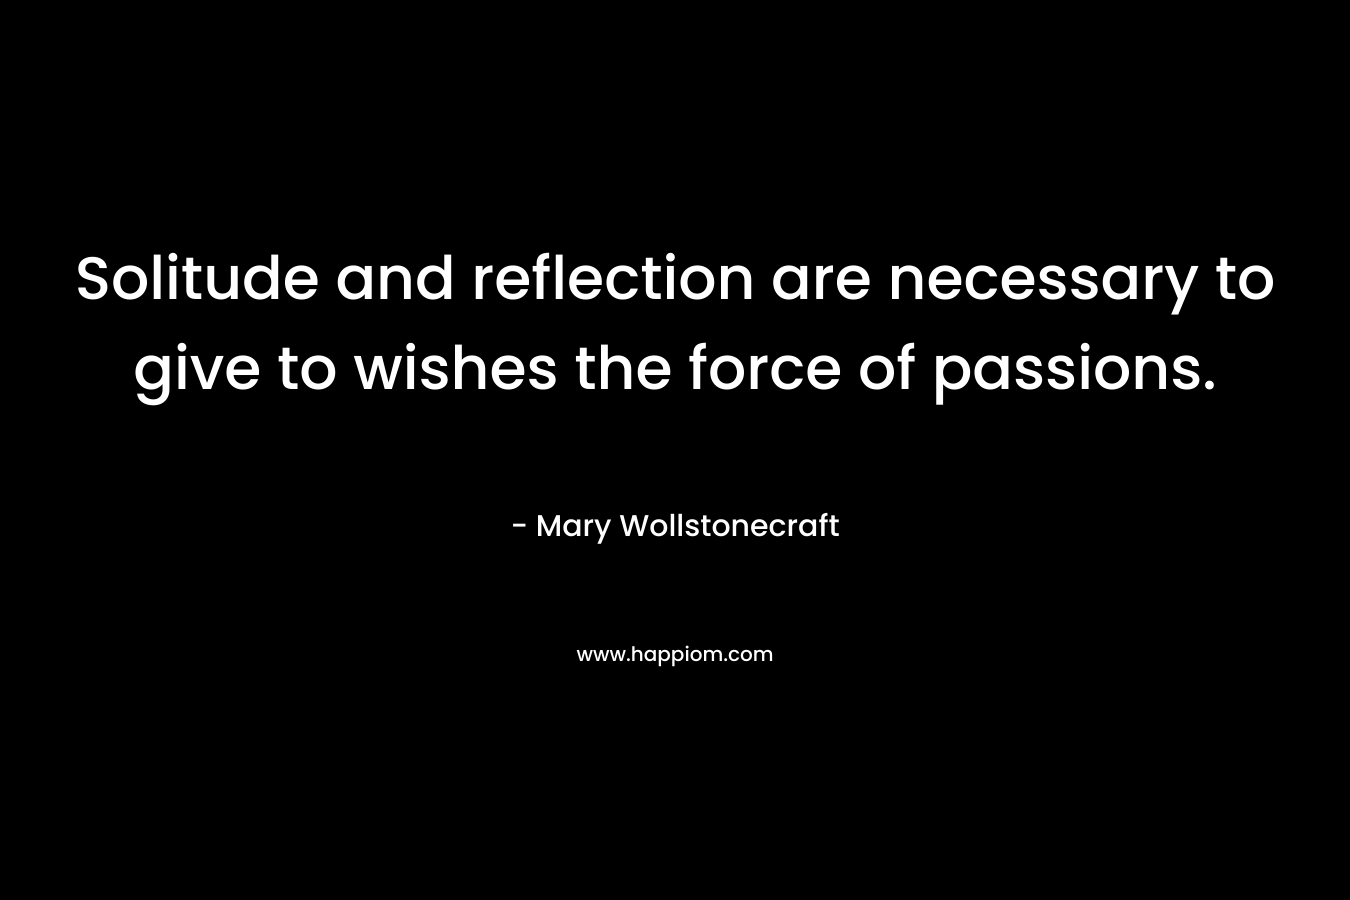 Solitude and reflection are necessary to give to wishes the force of passions. – Mary Wollstonecraft